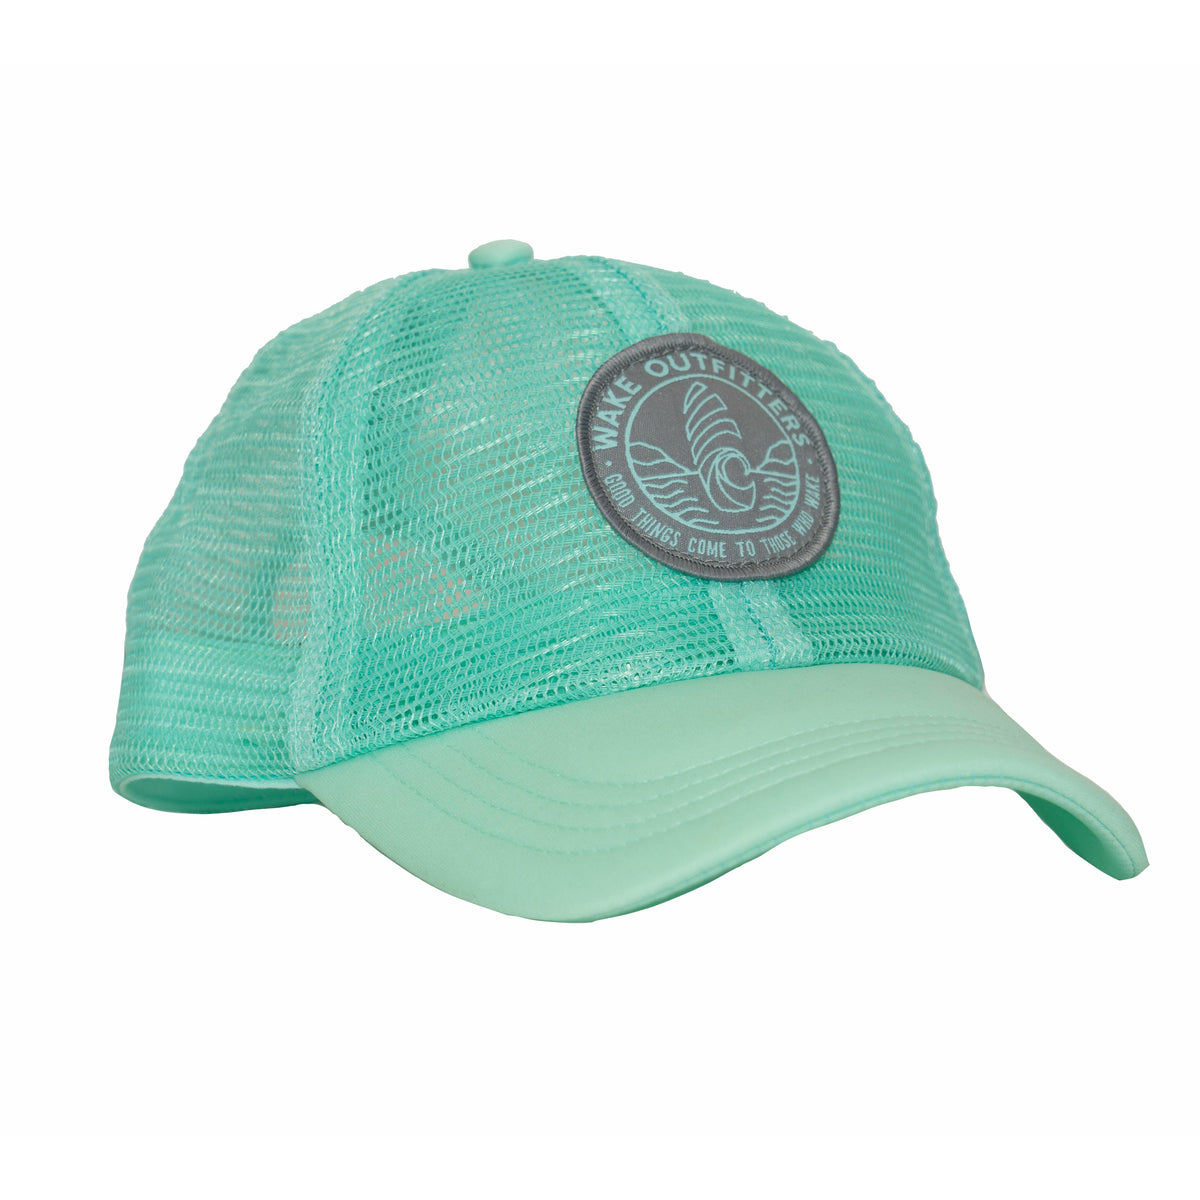 Wake Outfitters Full Mesh Hat - Mint